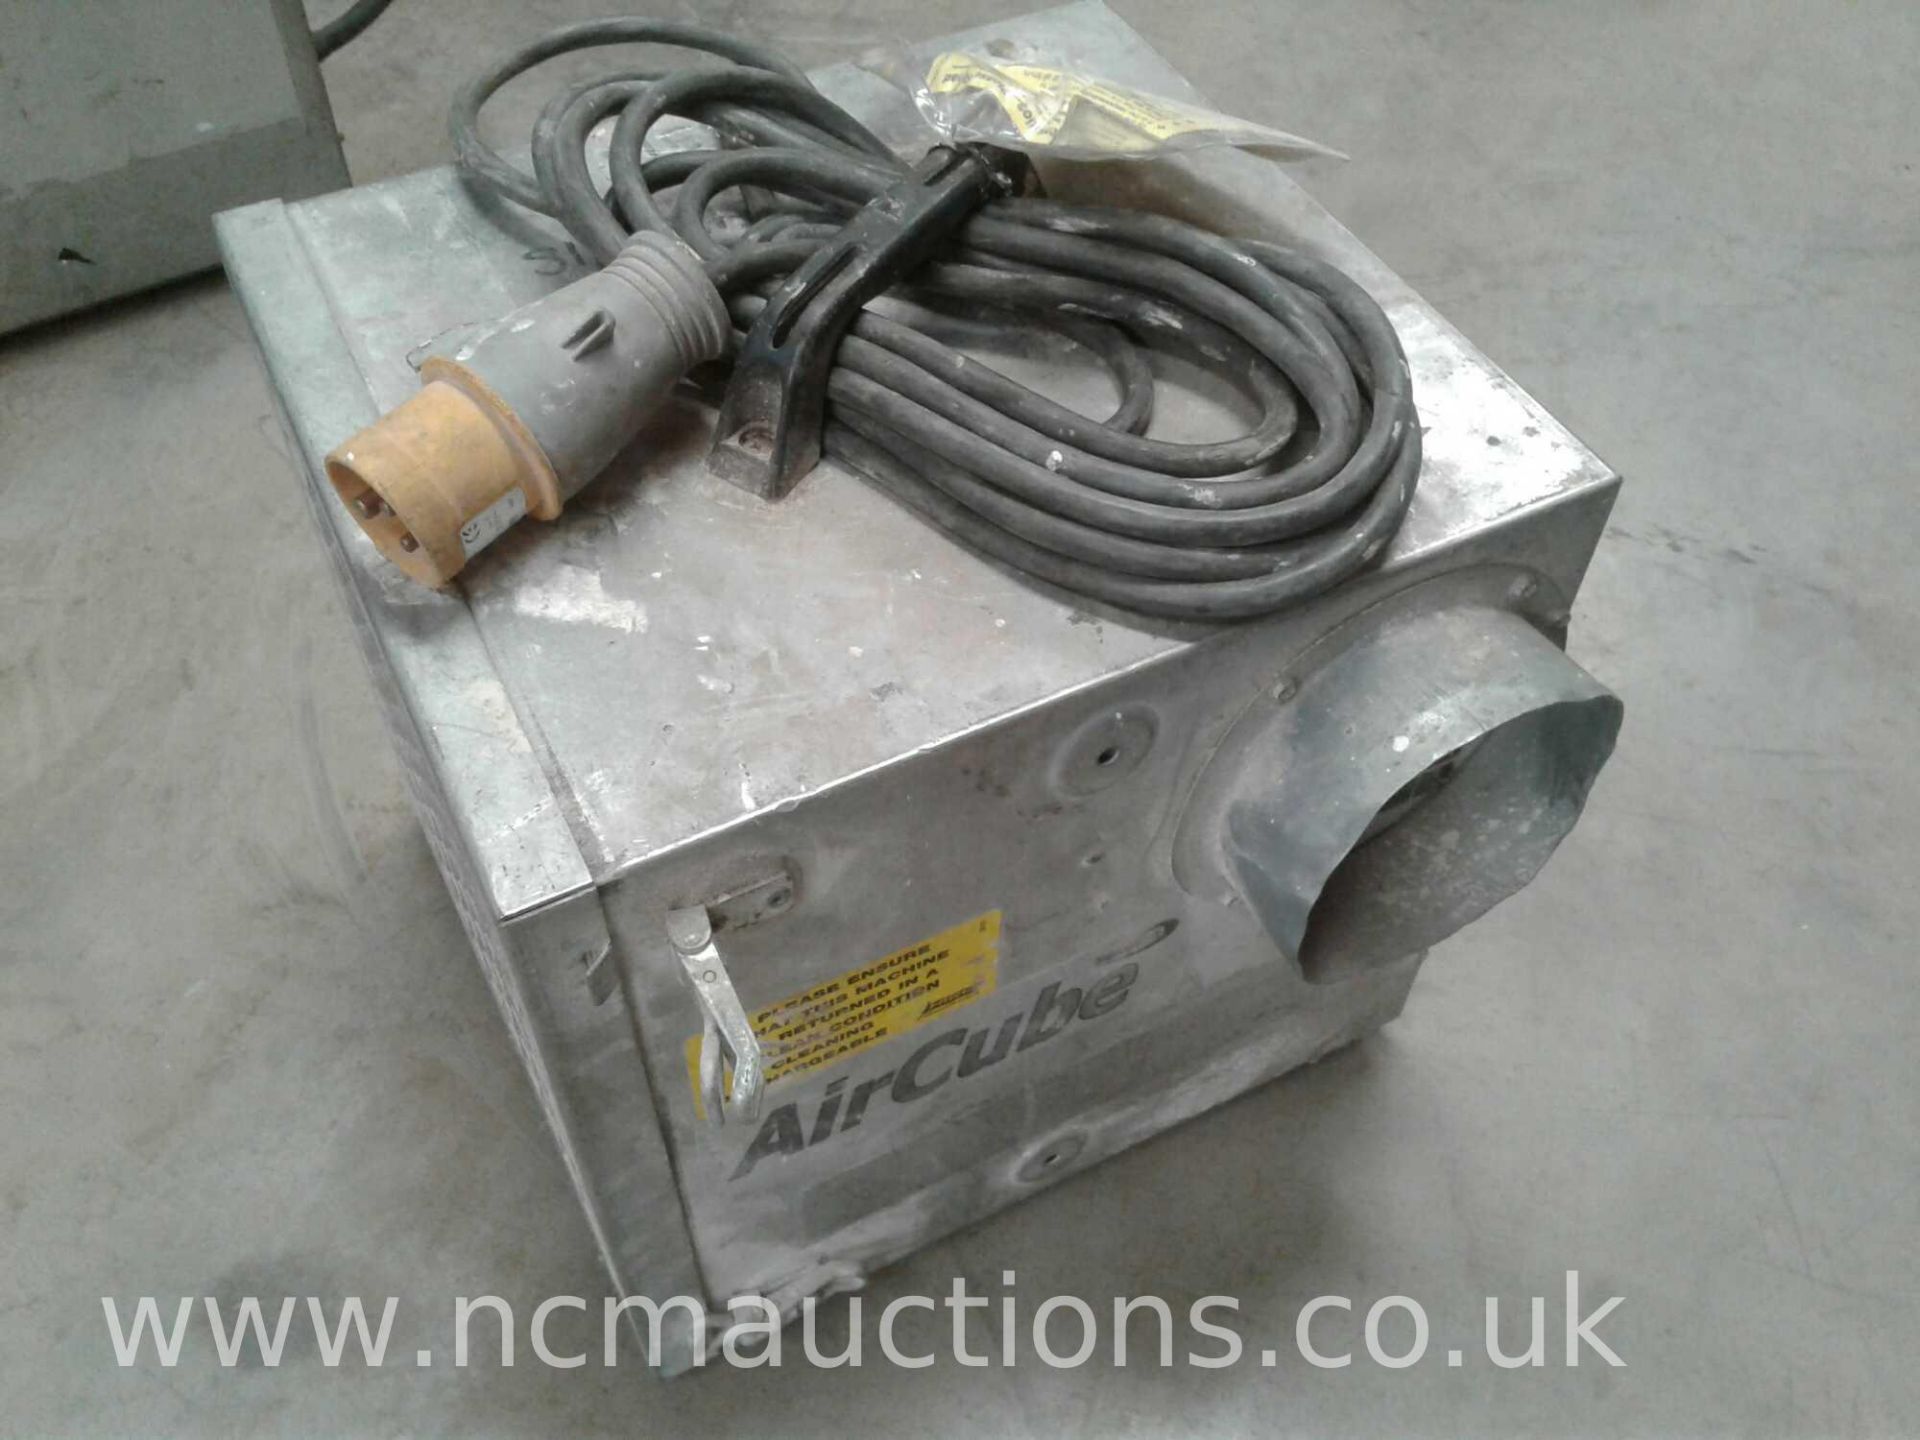 Air cube dust extraction unit 110v